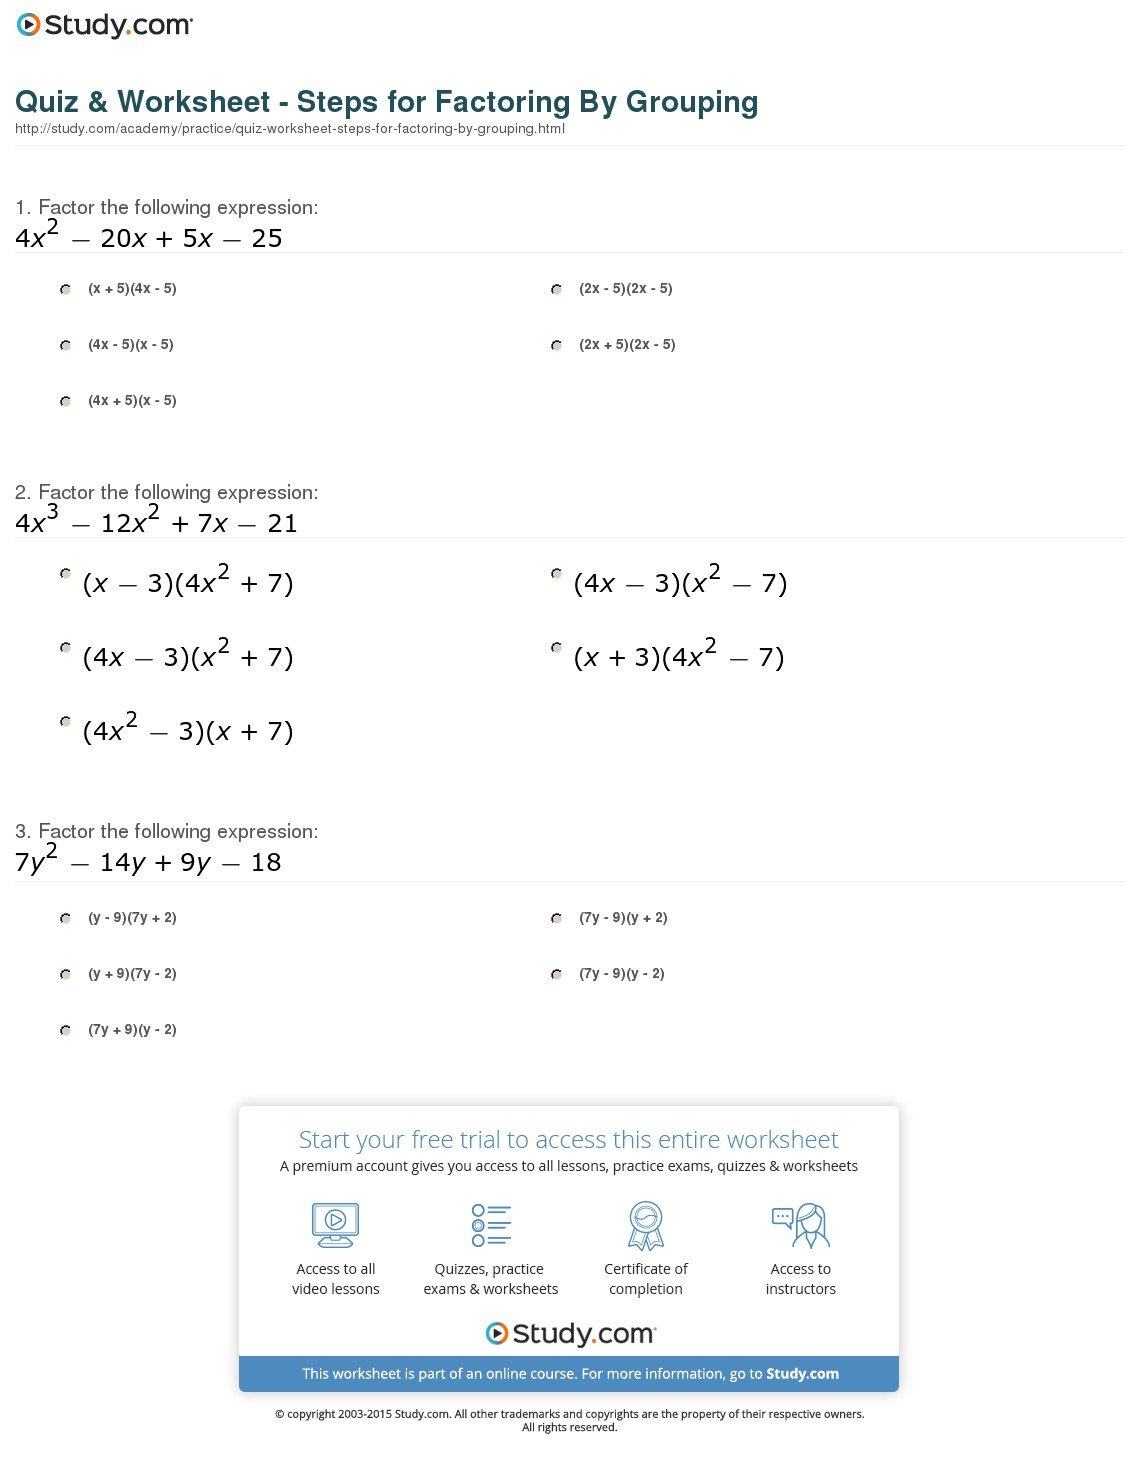 Quiz  Worksheet  Steps For Factoringgrouping  Study Pertaining To Factoring By Grouping Worksheet Algebra 2 Answers